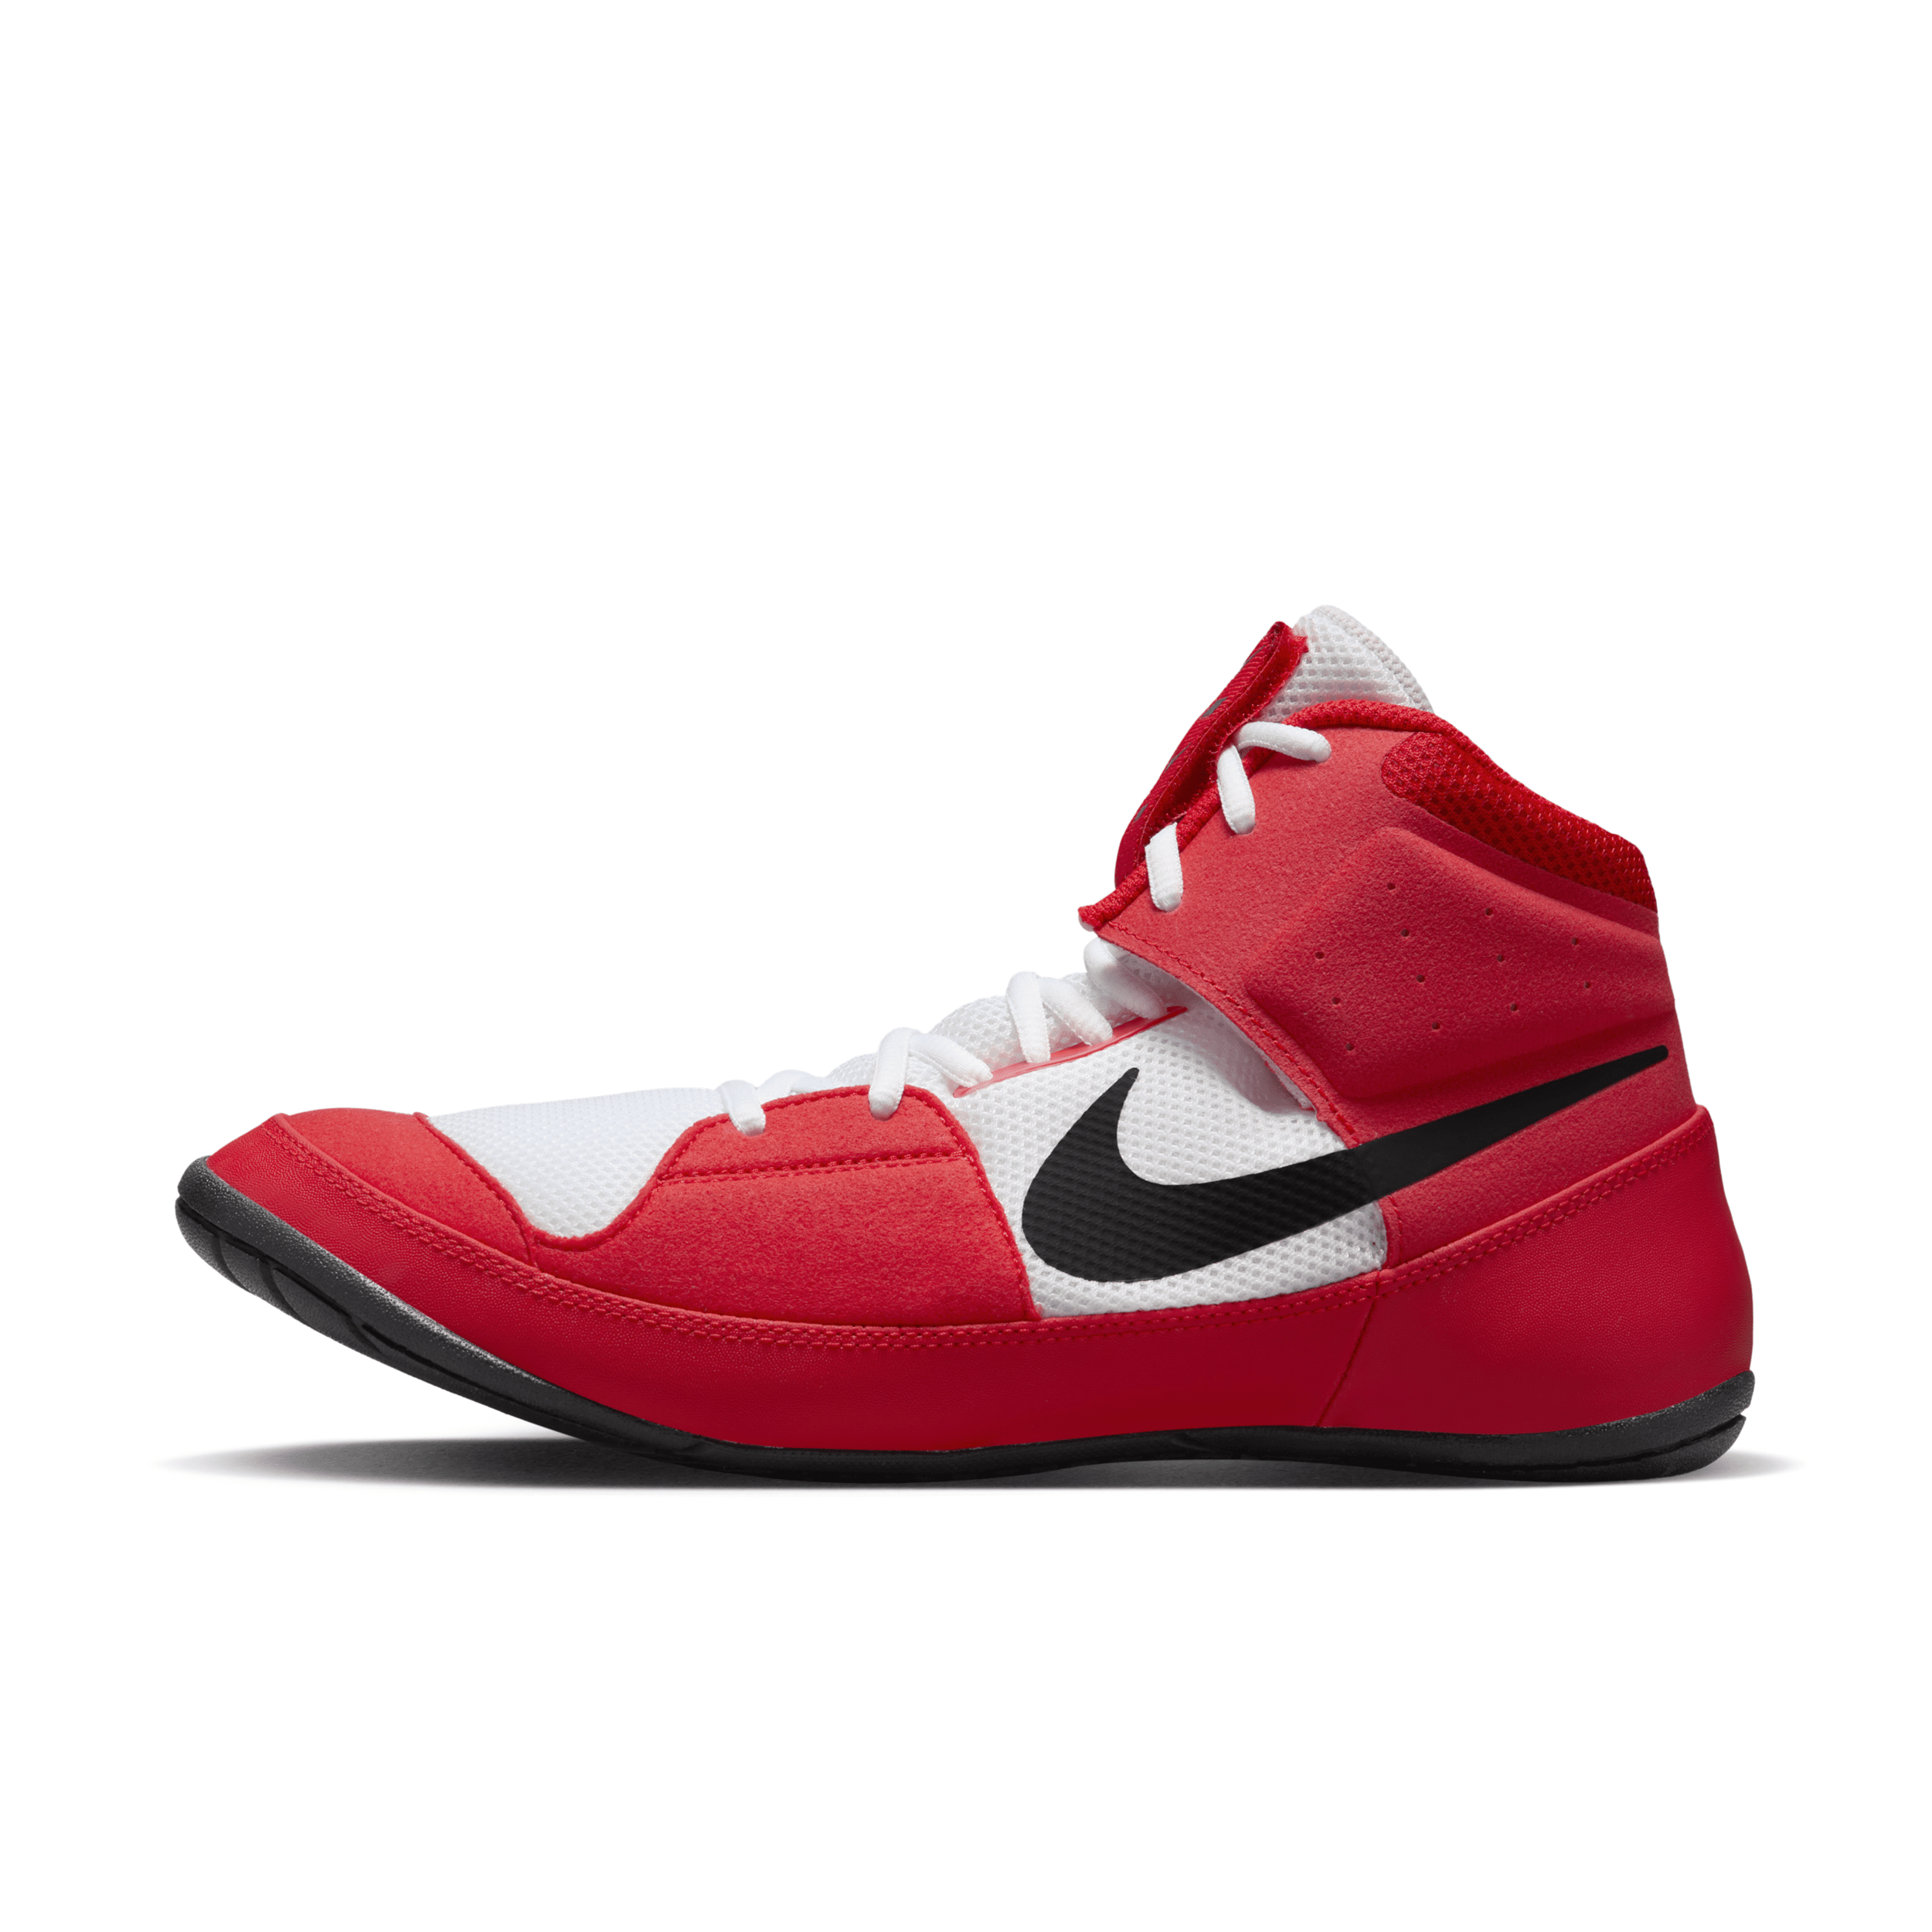 Nike Unisex Fury Wrestling Shoes In Red